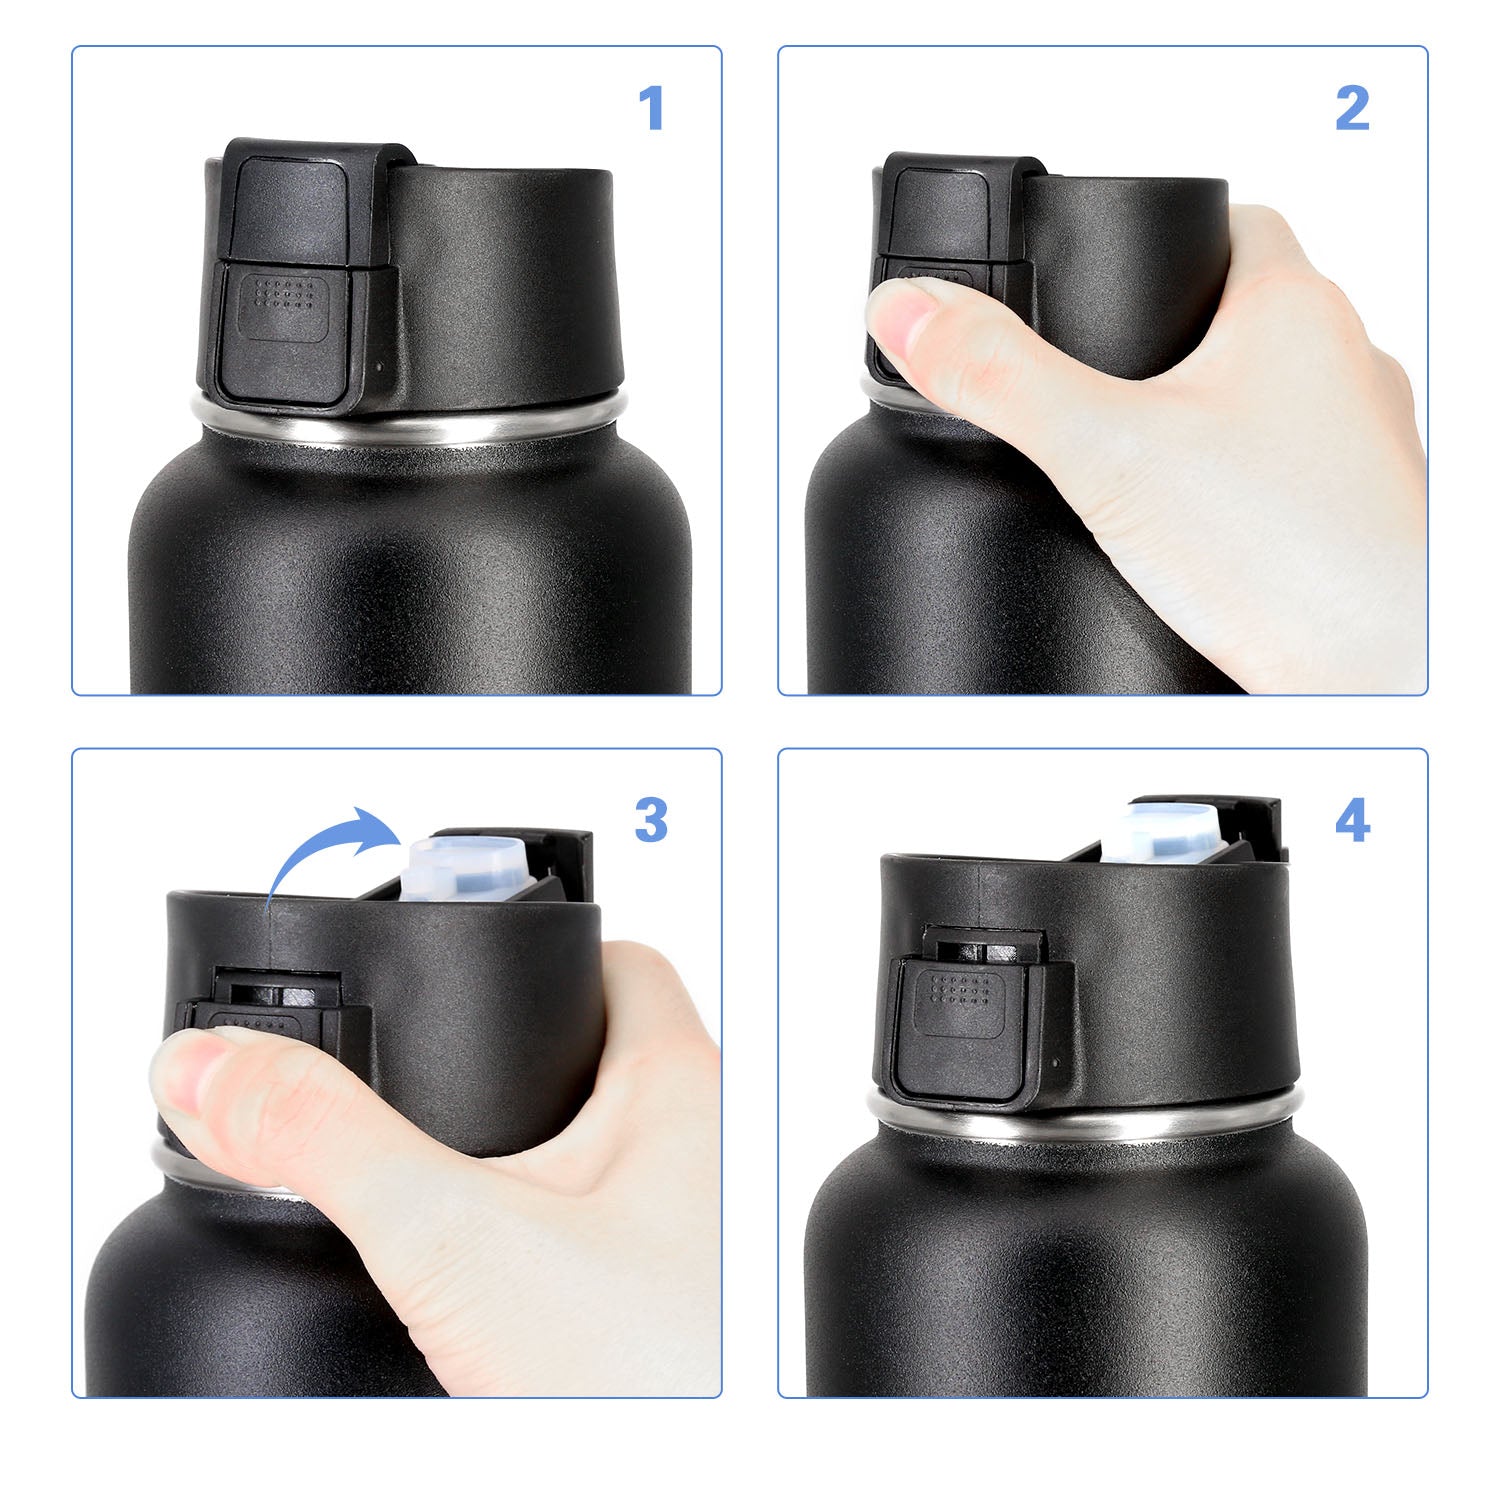 EIPOSAU Auto Flip Lid for Hydro Flask Wide Mouth, Great Spout Lid for Simple Modern, Takeya, Iron Flask and Other Brands, Replacement Lid with Button